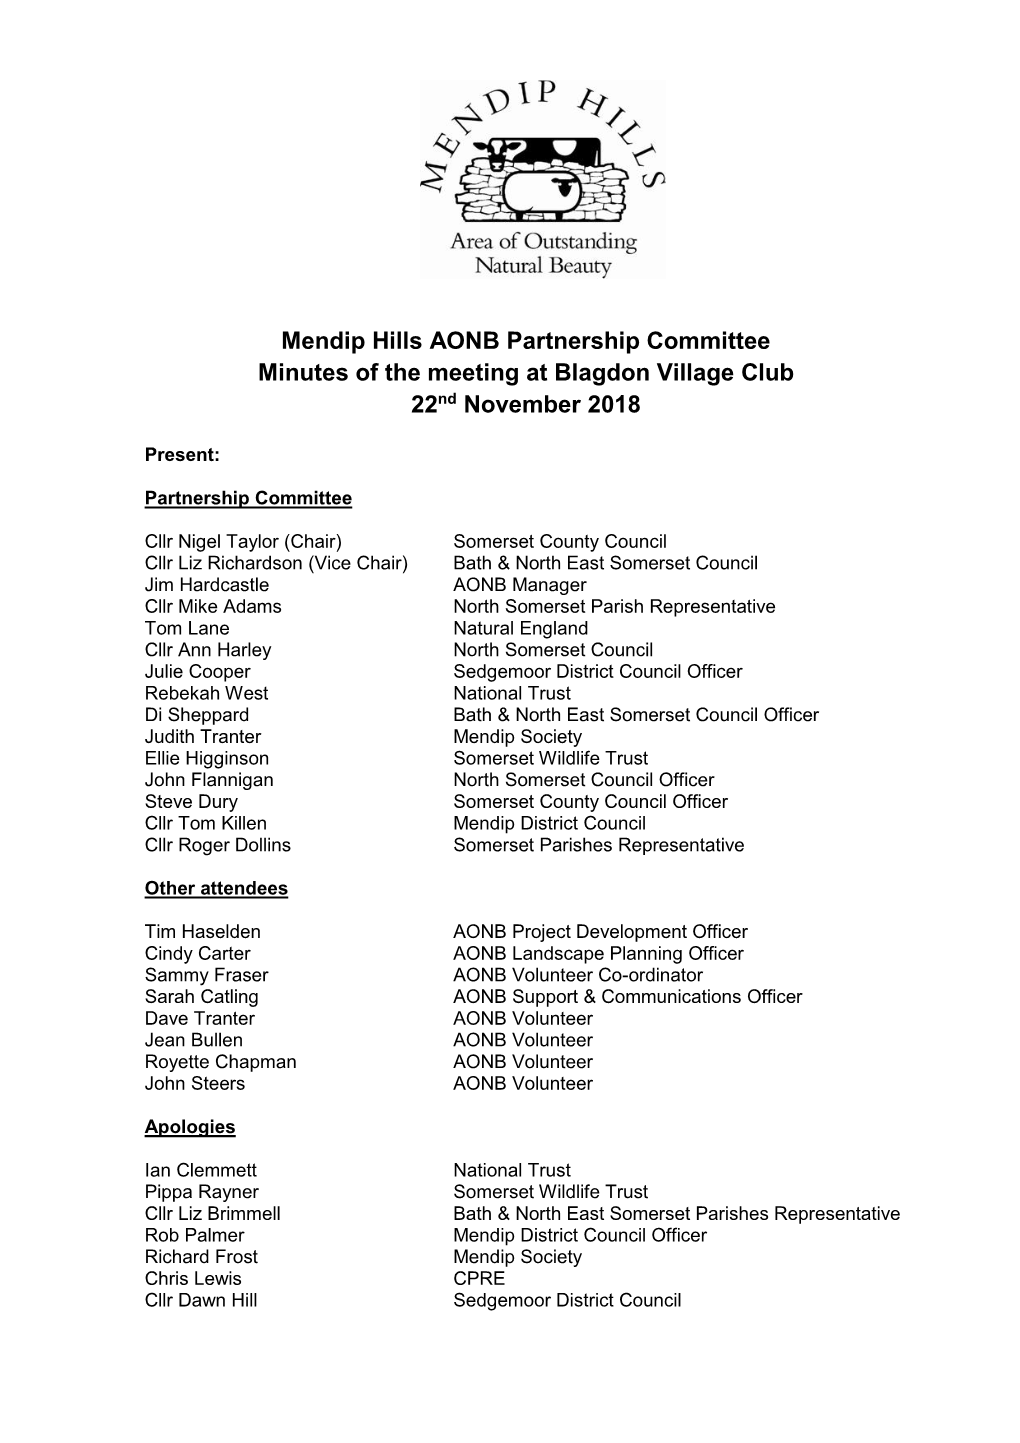 Mendip Hills AONB Partnership Committee Minutes of the Meeting at Blagdon Village Club 22Nd November 2018